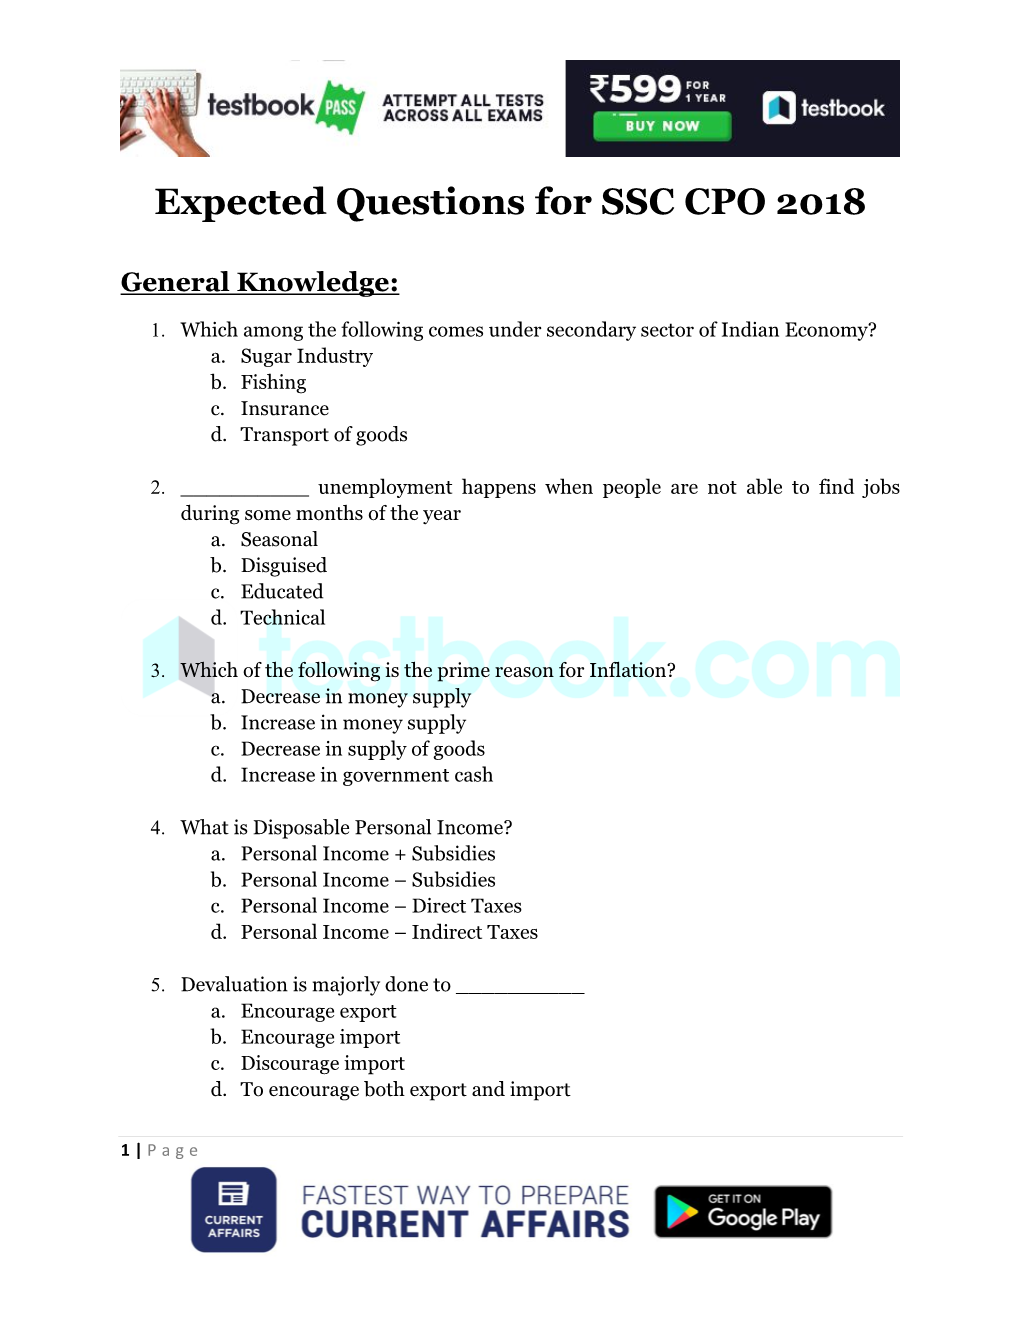 Expected Questions for SSC CPO 2018